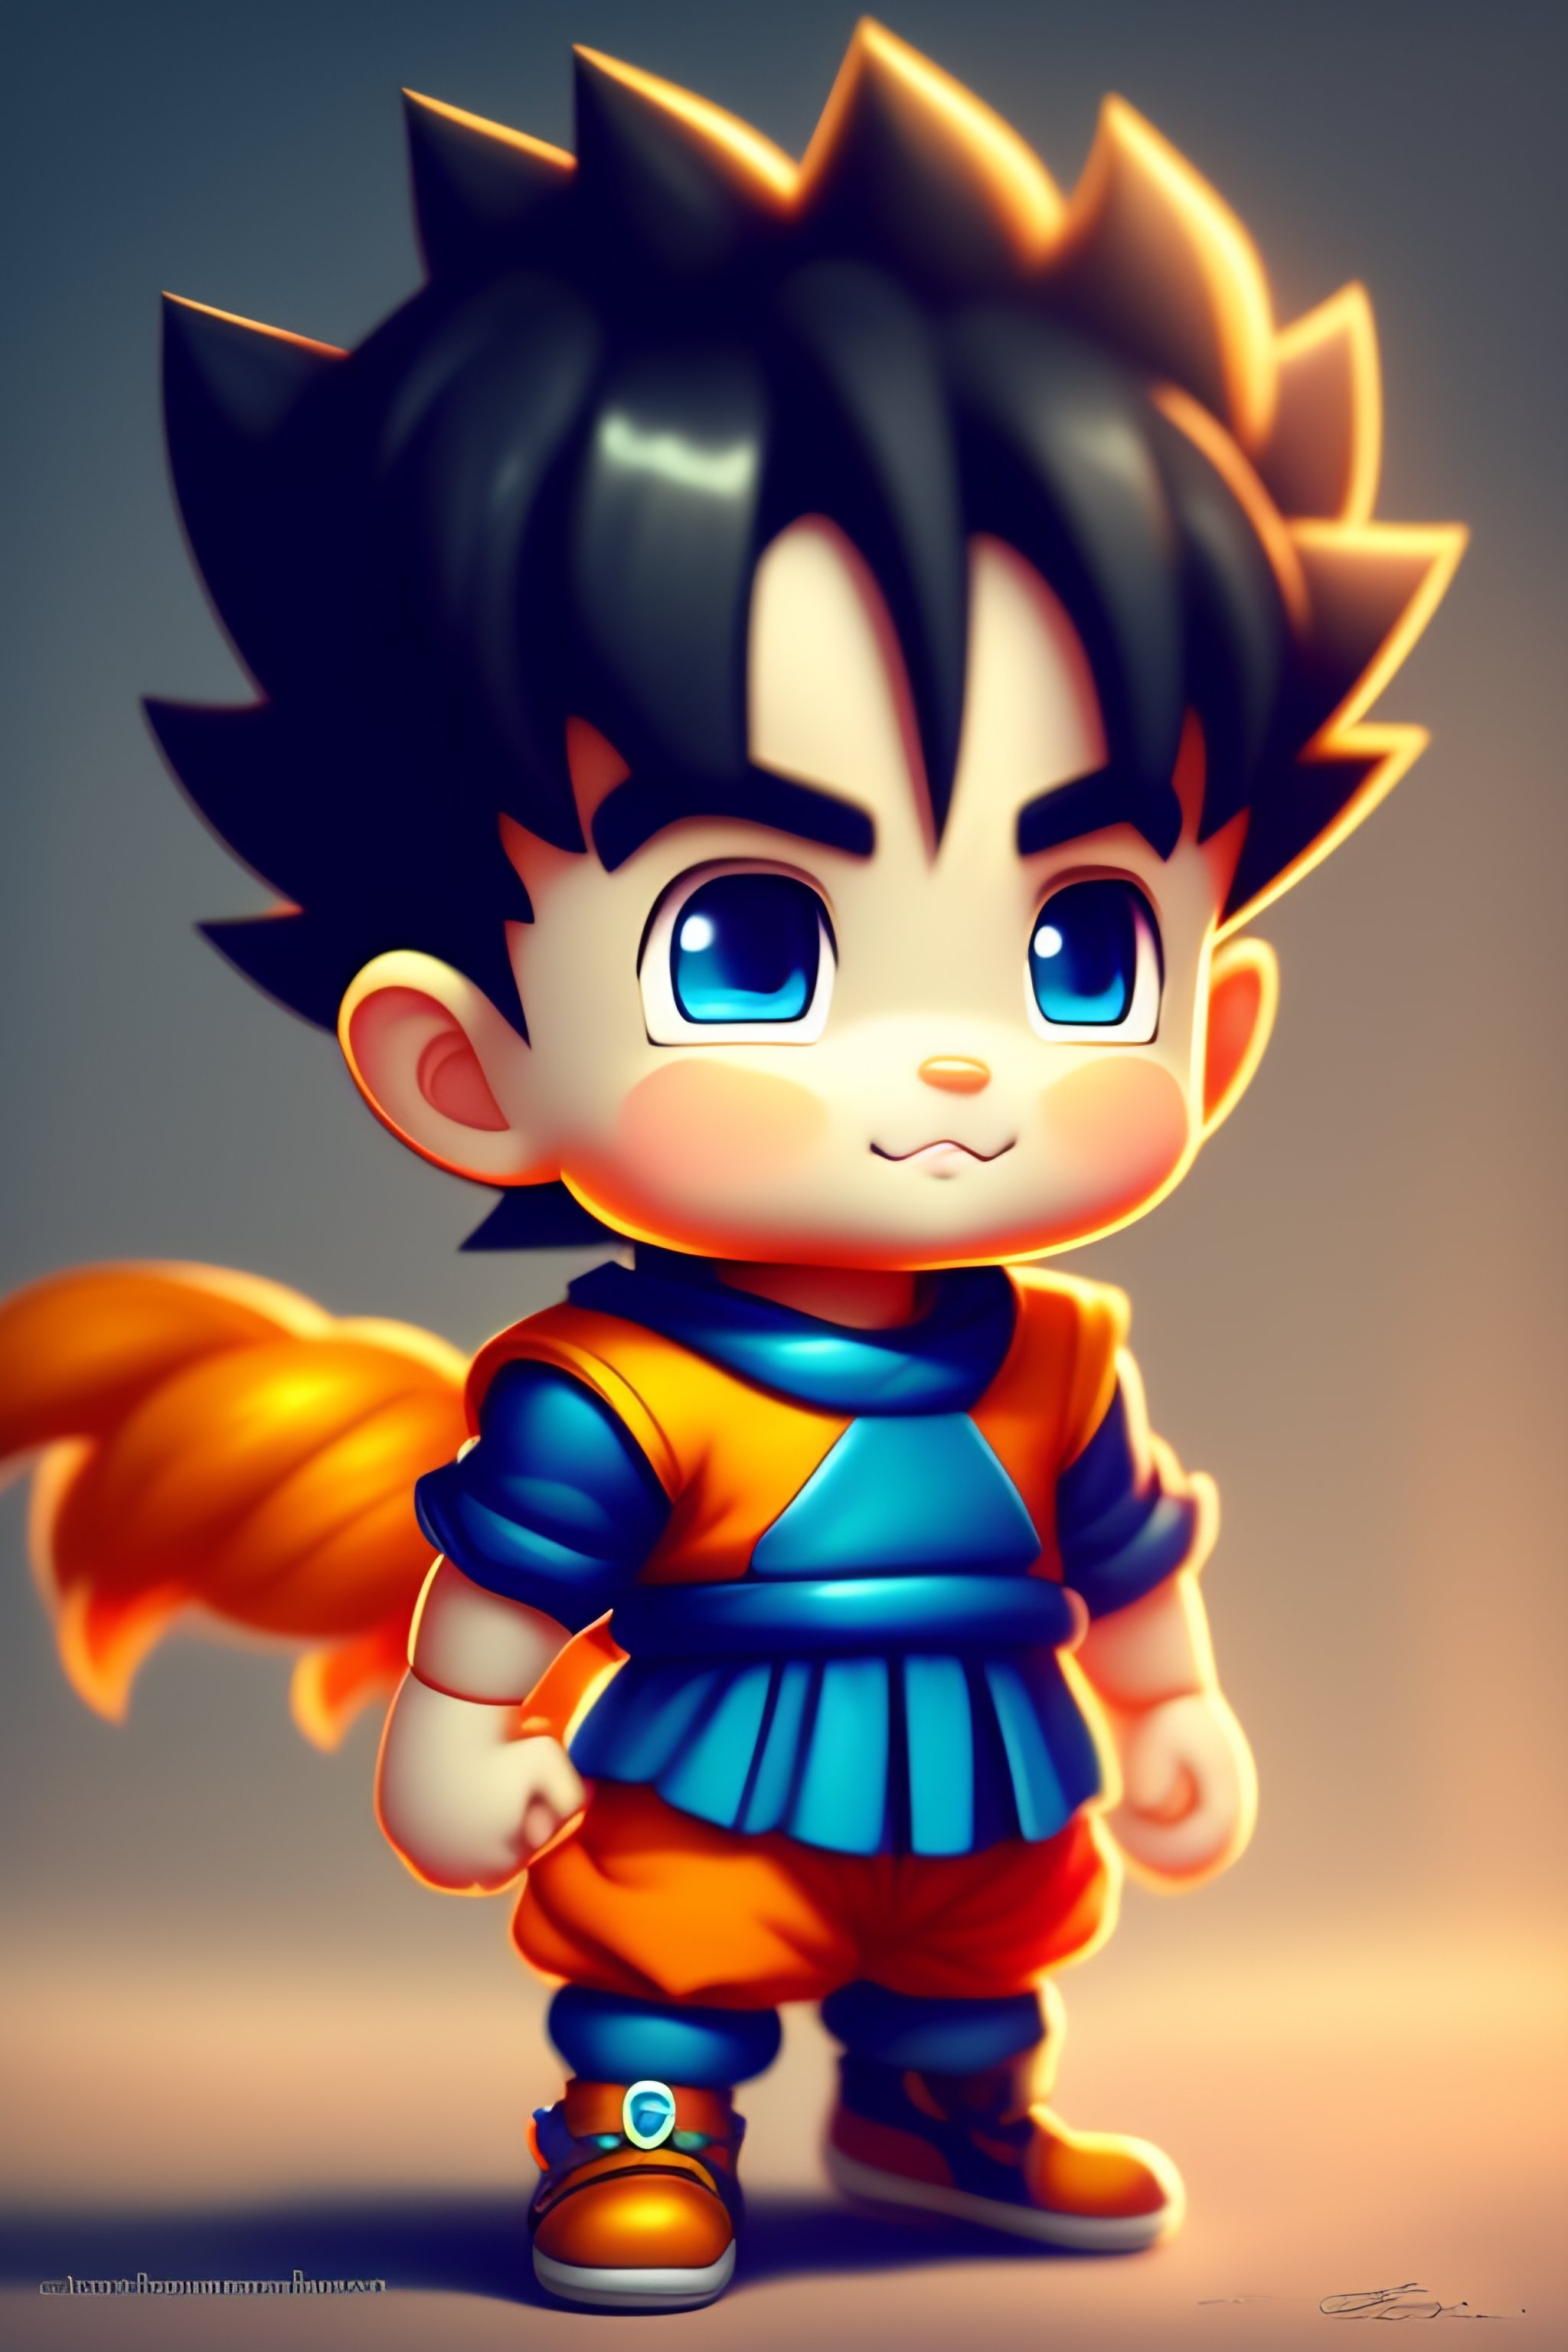 𝙈𝙈𝙖𝙞𝙧𝙤 on Twitter: "one of my fav things is definitely... super  saiyan goku w/ his normal cute eyes instead of his serious ones. very  wholesome... very organic https://t.co/UctjuJdk2d" / Twitter